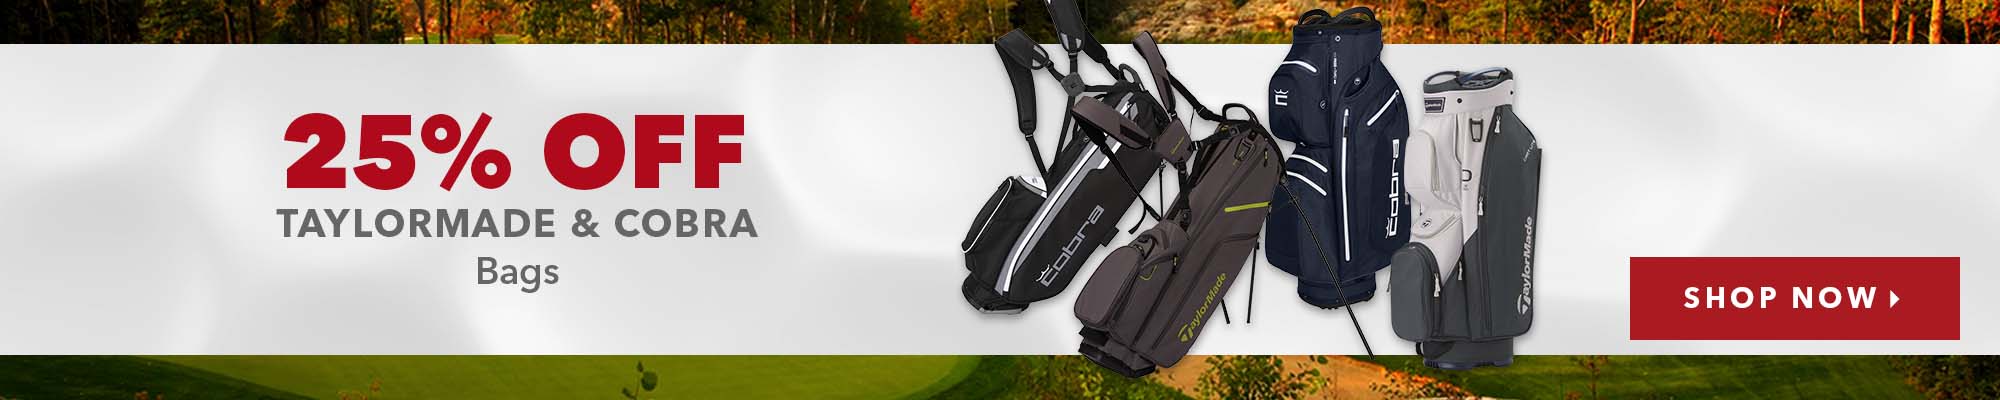 Taylormade & Cobra Bags - 25% Off 